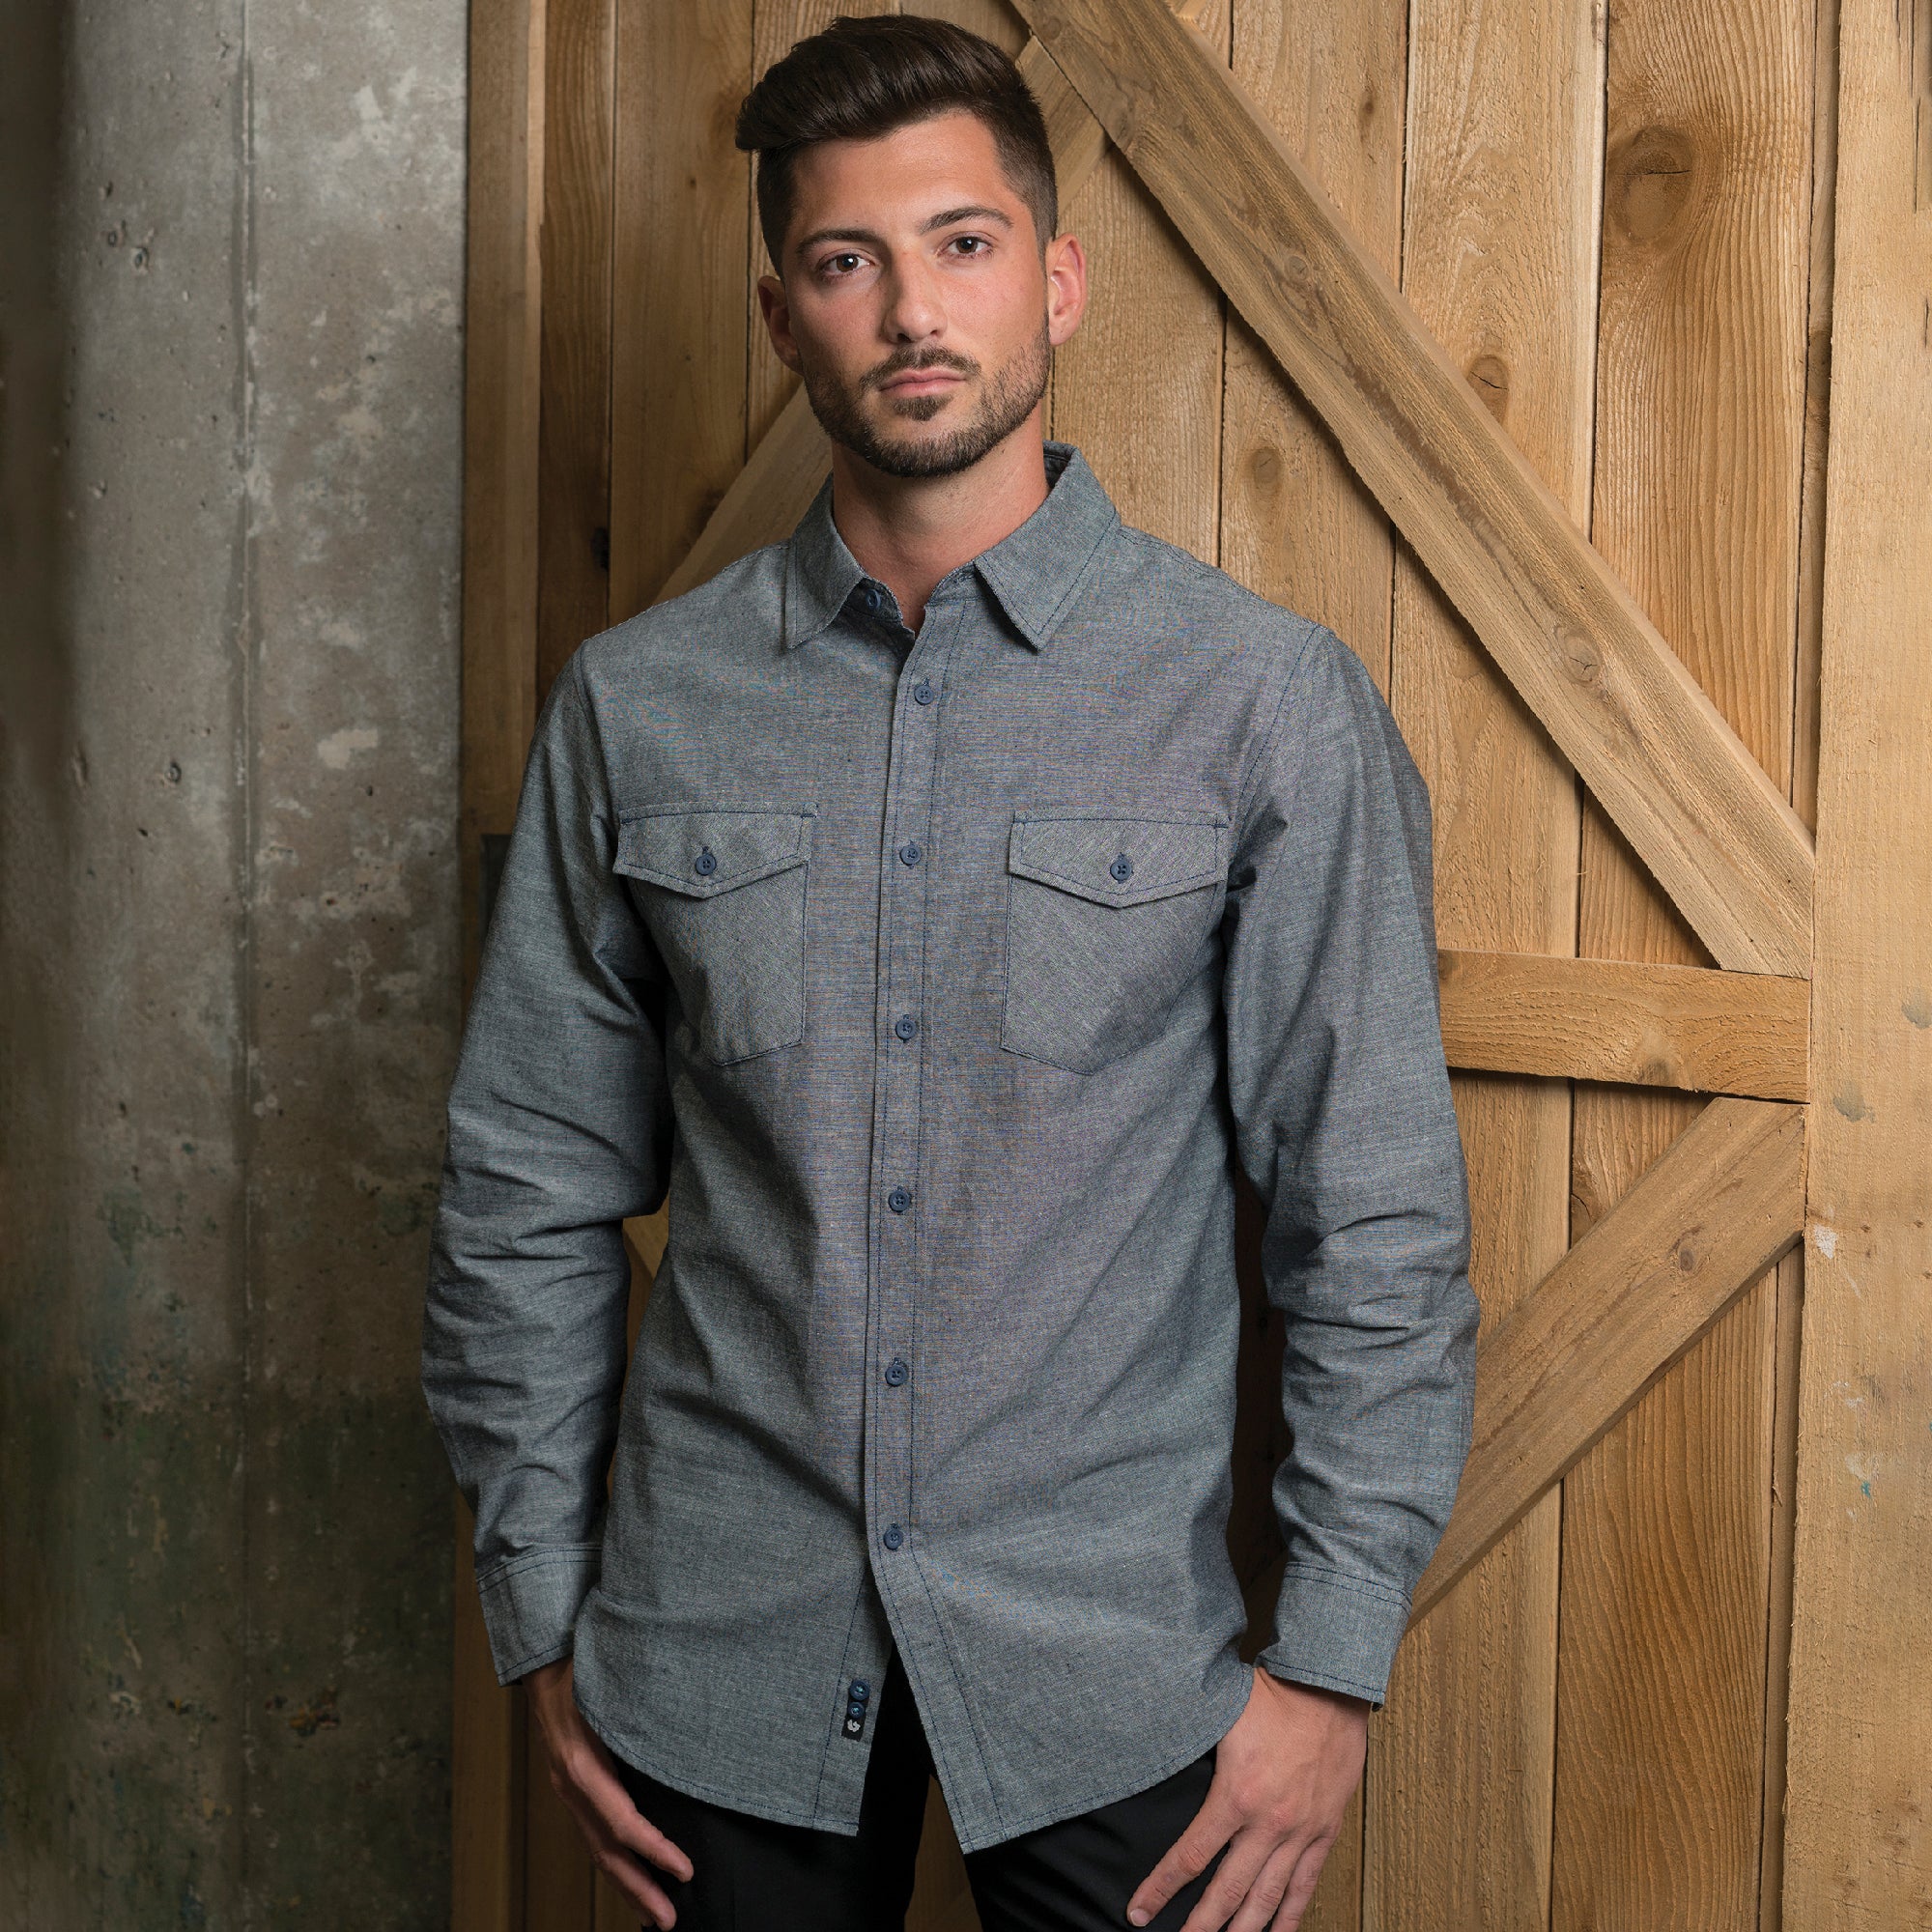 MENS LONG SLEEVE ALL-DAY CHAMBRAY